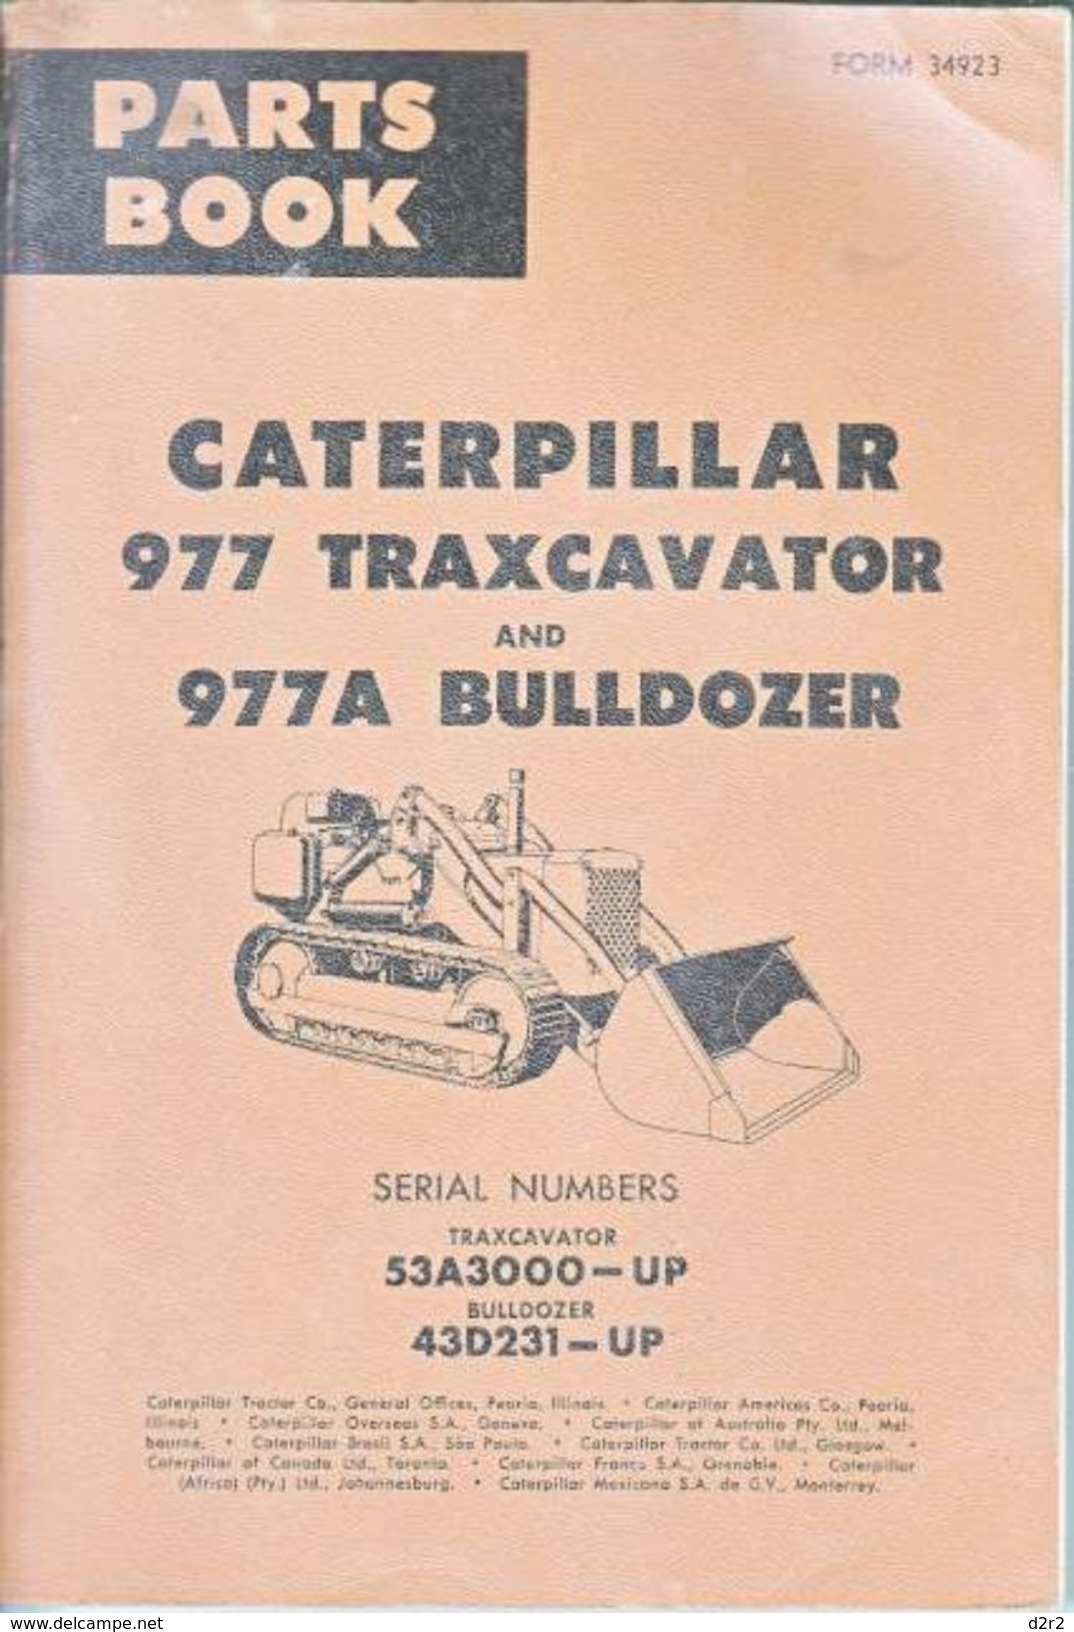 CATERPILLAR 977 TRAXCAVATOR AND 977A BULLDOZER - (1963) - OUVRAGE TECHNIQUE AVEC DETAILS.-USA- 224 PAGES - Machines